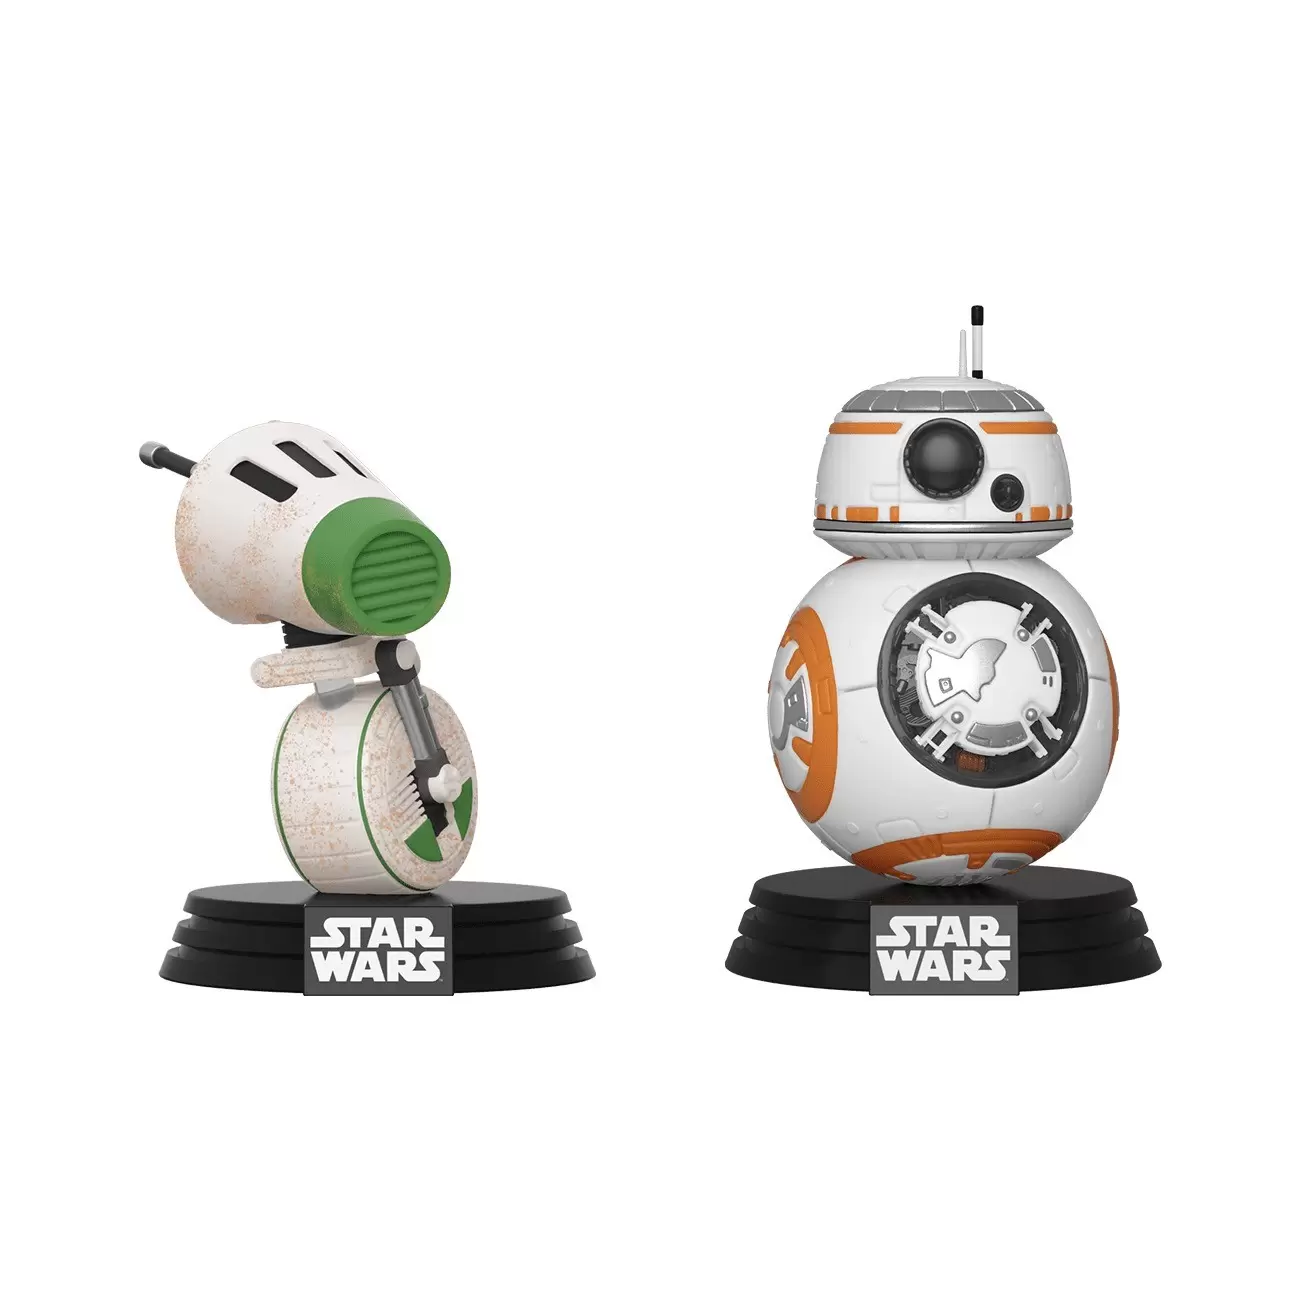 POP! Star Wars - D-O and BB-8 2 Pack